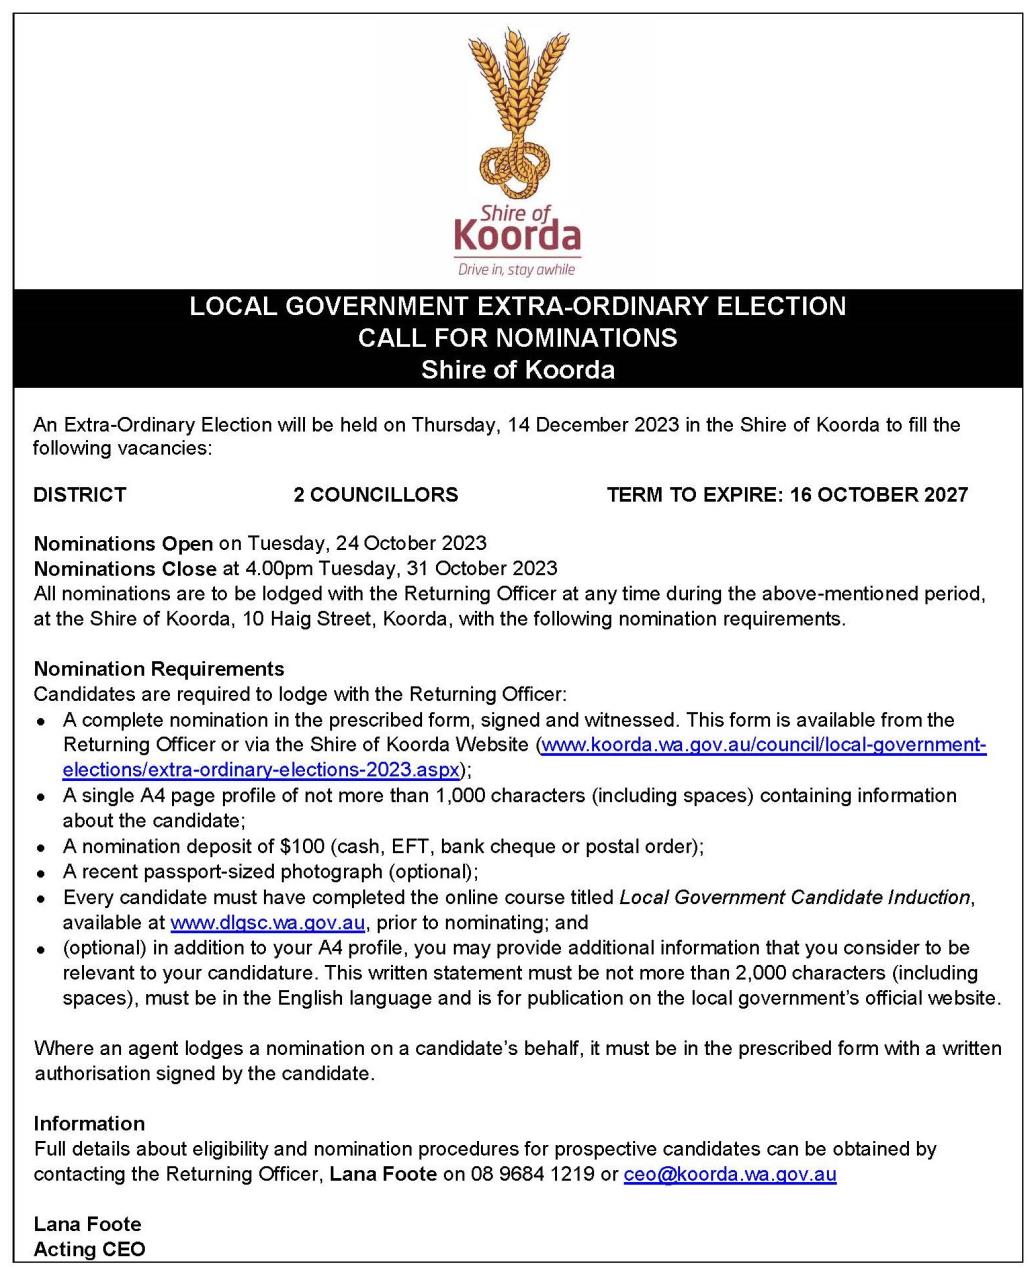 Shire of Koorda - Call for Nominations - 2023 Extra-Ordinary